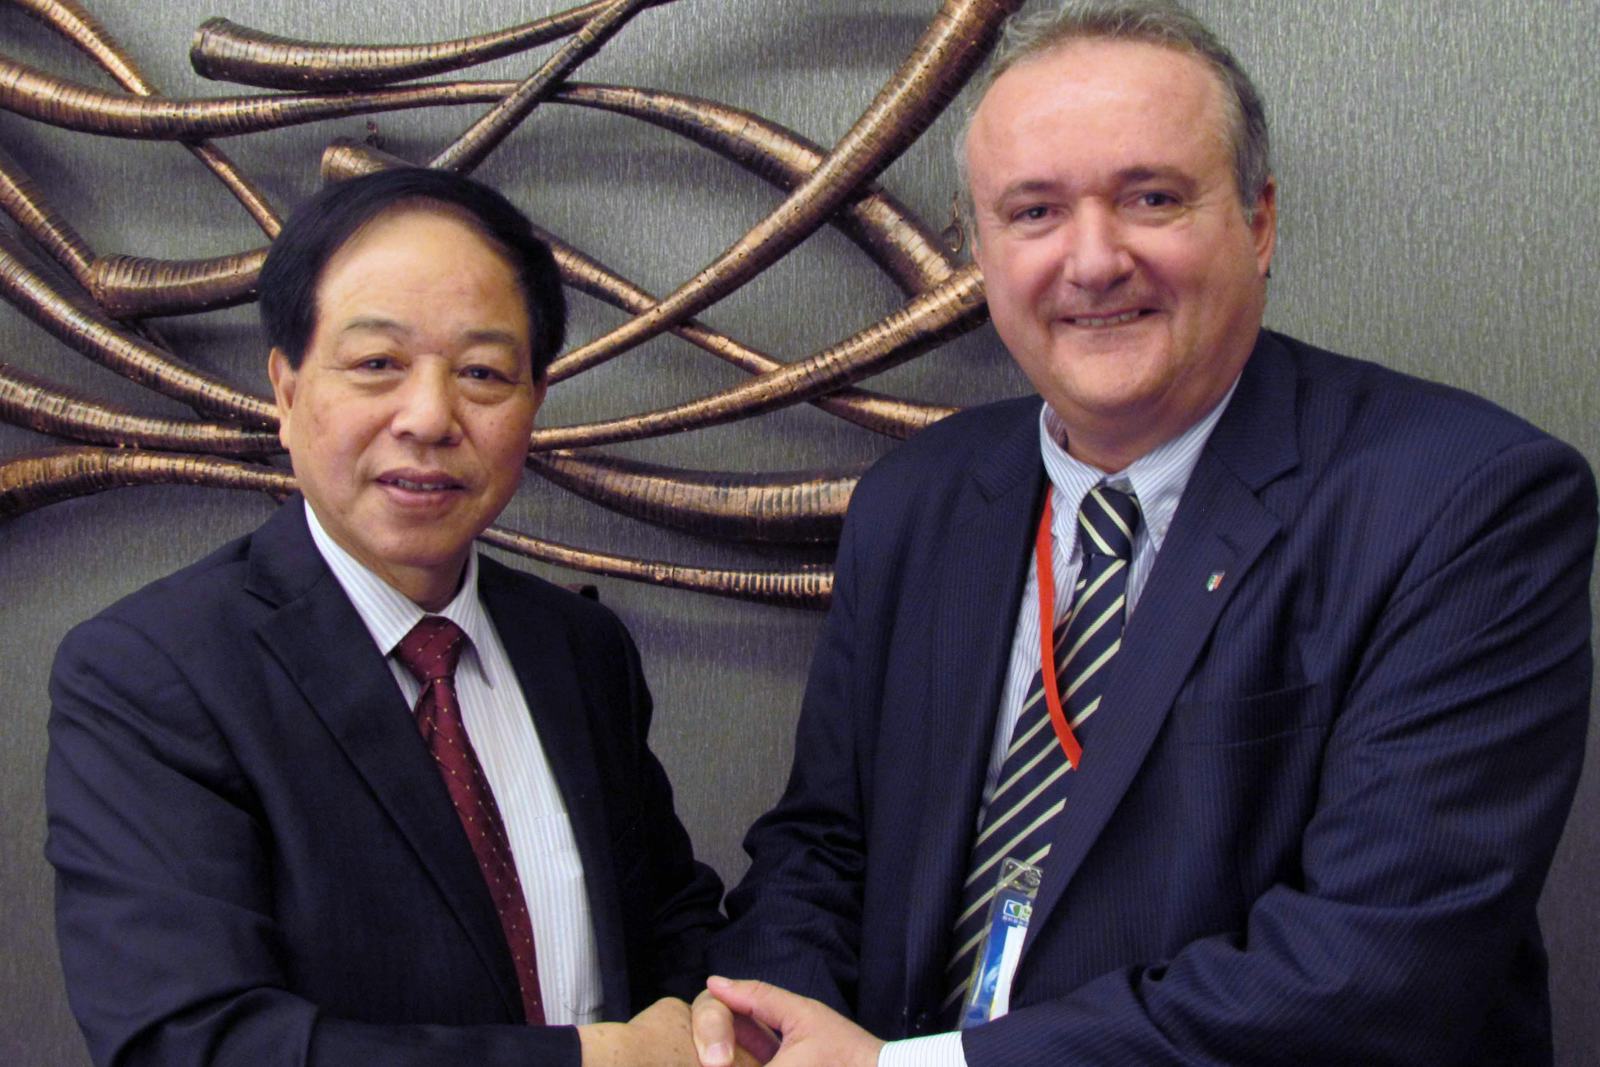 China Bicycle Association Chairman Ma Zhongchao (left) and representative for the EU industry associations COLIBI/COLIPED, Moreno Fioravanti, shake hands on the start of discussions to get to harmonized safety standards for e-bikes on a worldwide scale. – Photo Bike Europe